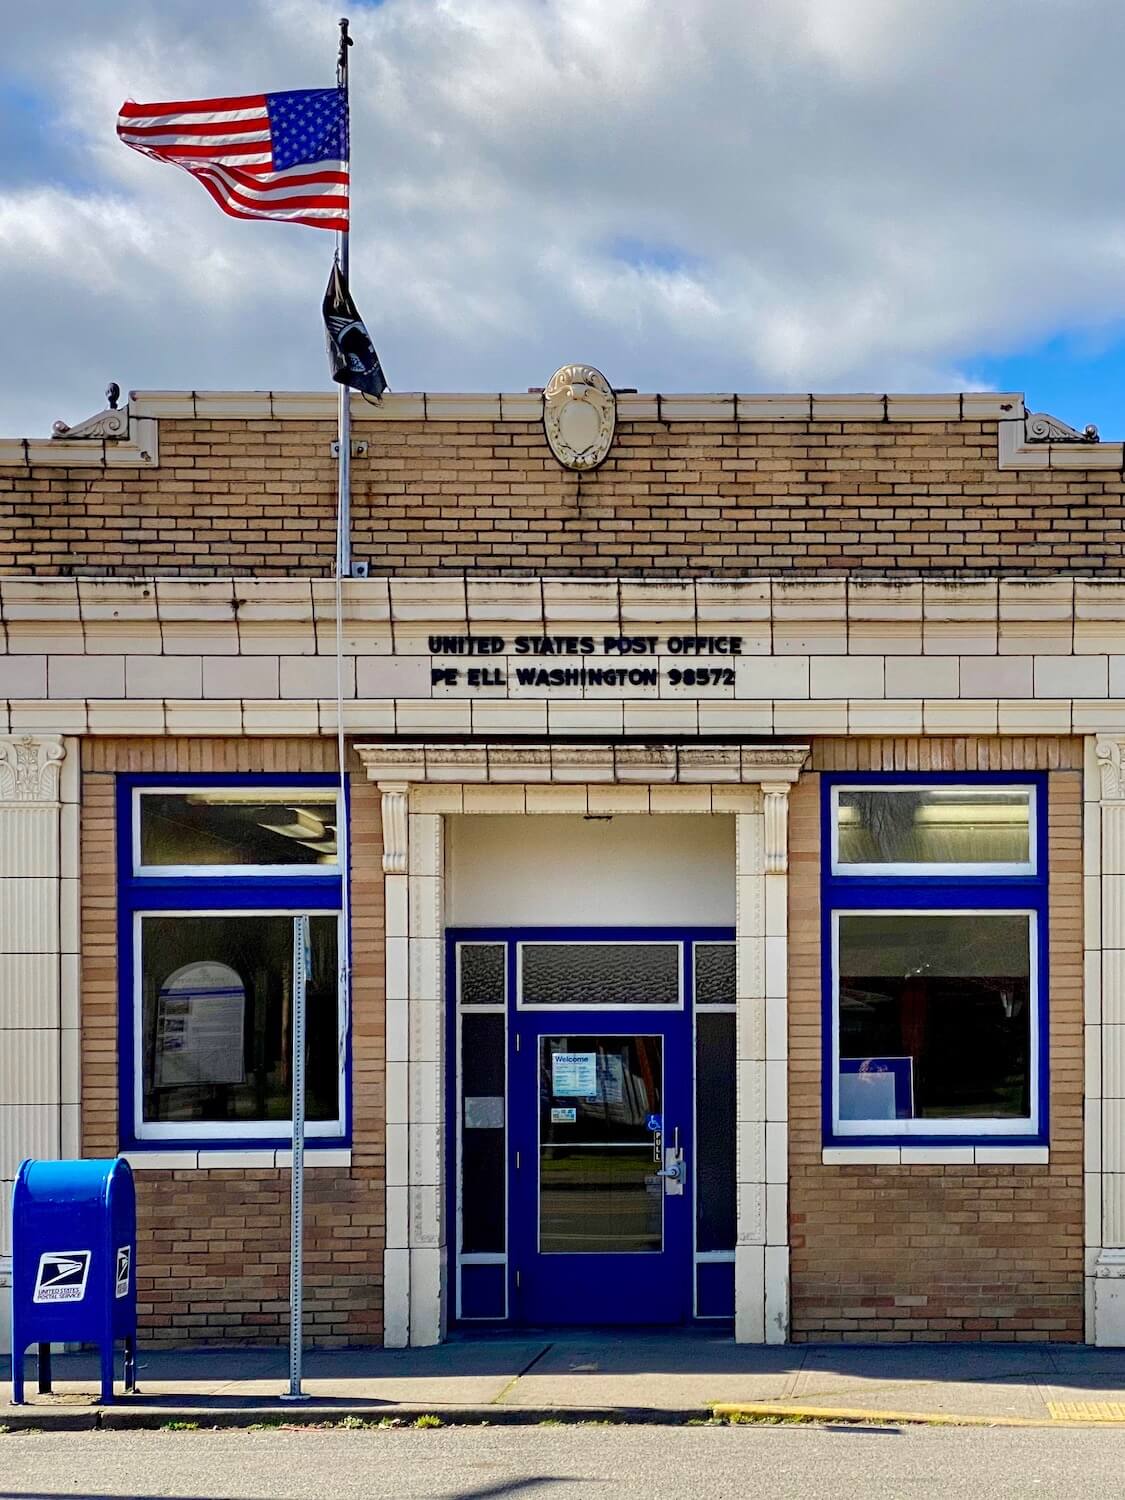 The quaint and tiny Pe Ell, Washington post office is built from light orange bricks with stone archway and blue trim around two windows. A sharply painted blue USPS post office box sits on the sidewalk next to a flag pole flying the US glad and a POW flag.